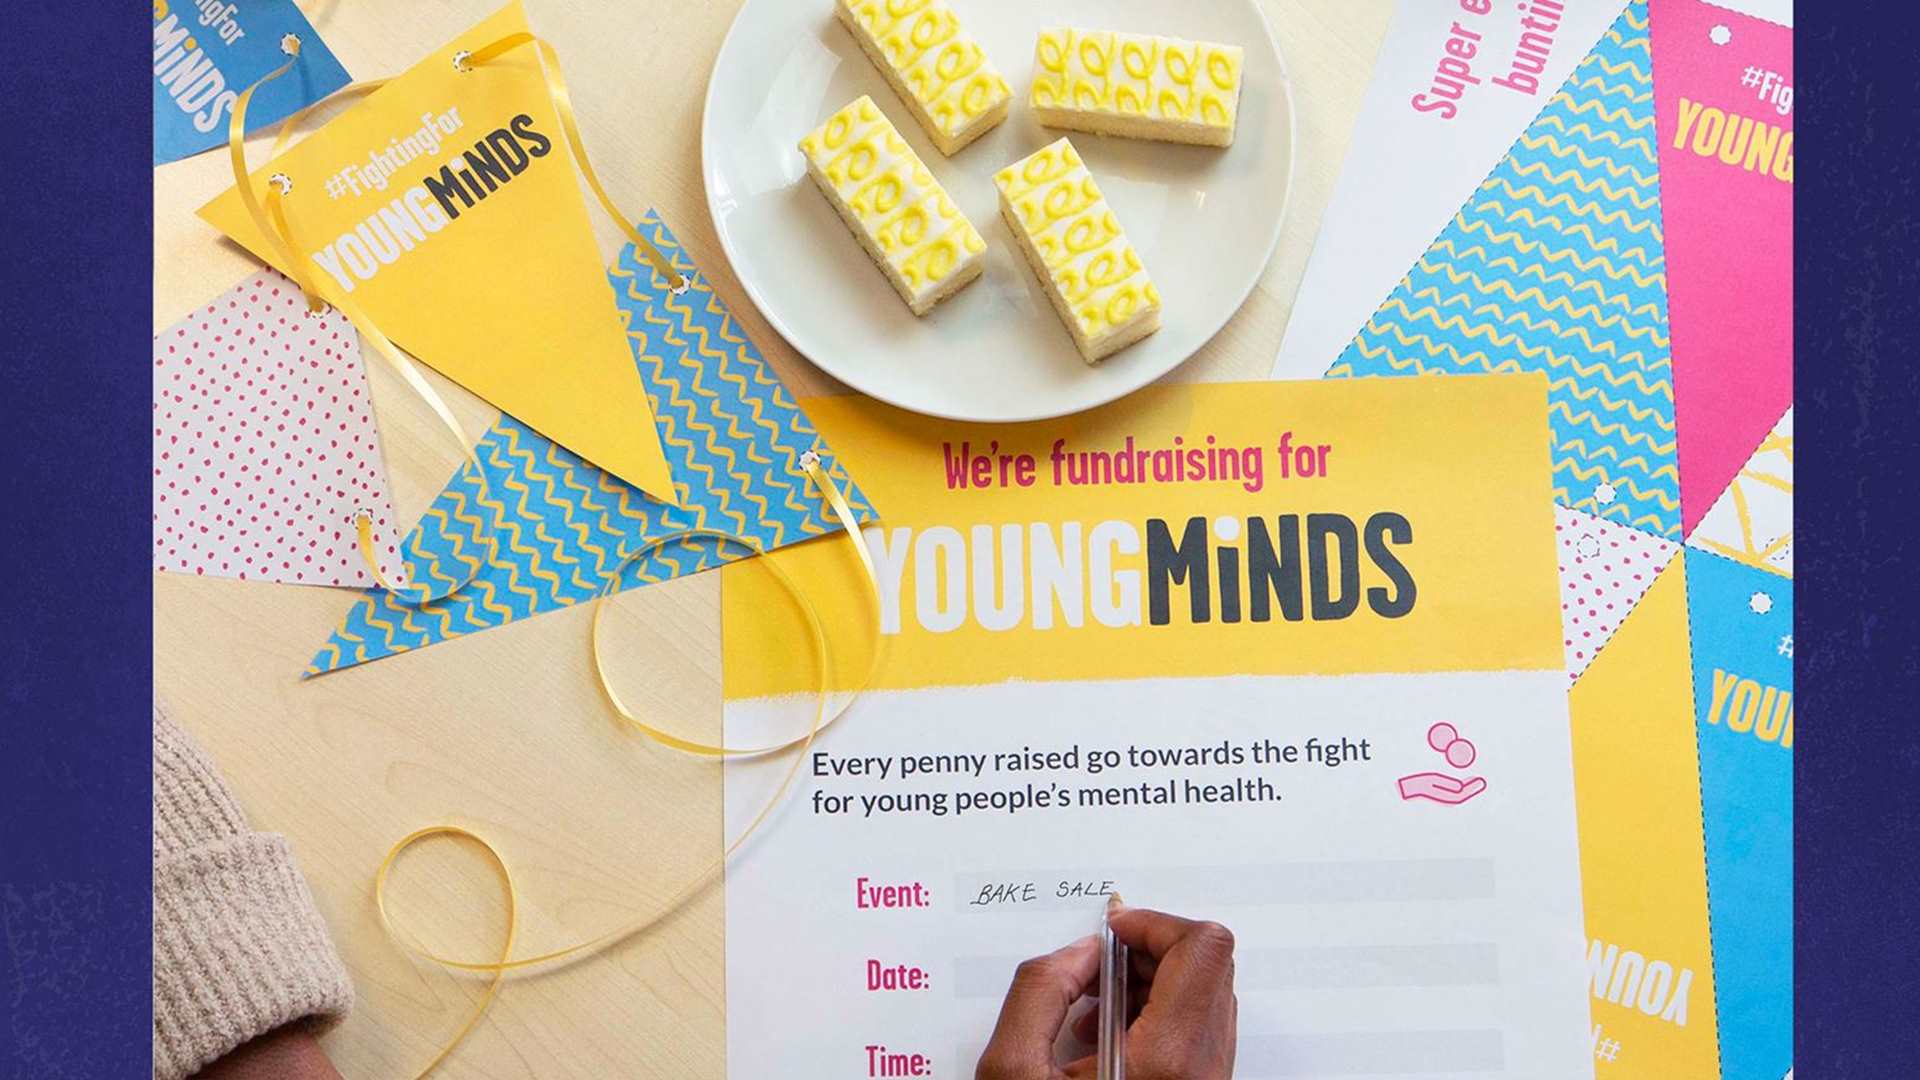 YoungMinds bunting is placed all over a desk with yellow ribbon. There are some yellow cake slices and our fundraising event poster which someone is writing on.